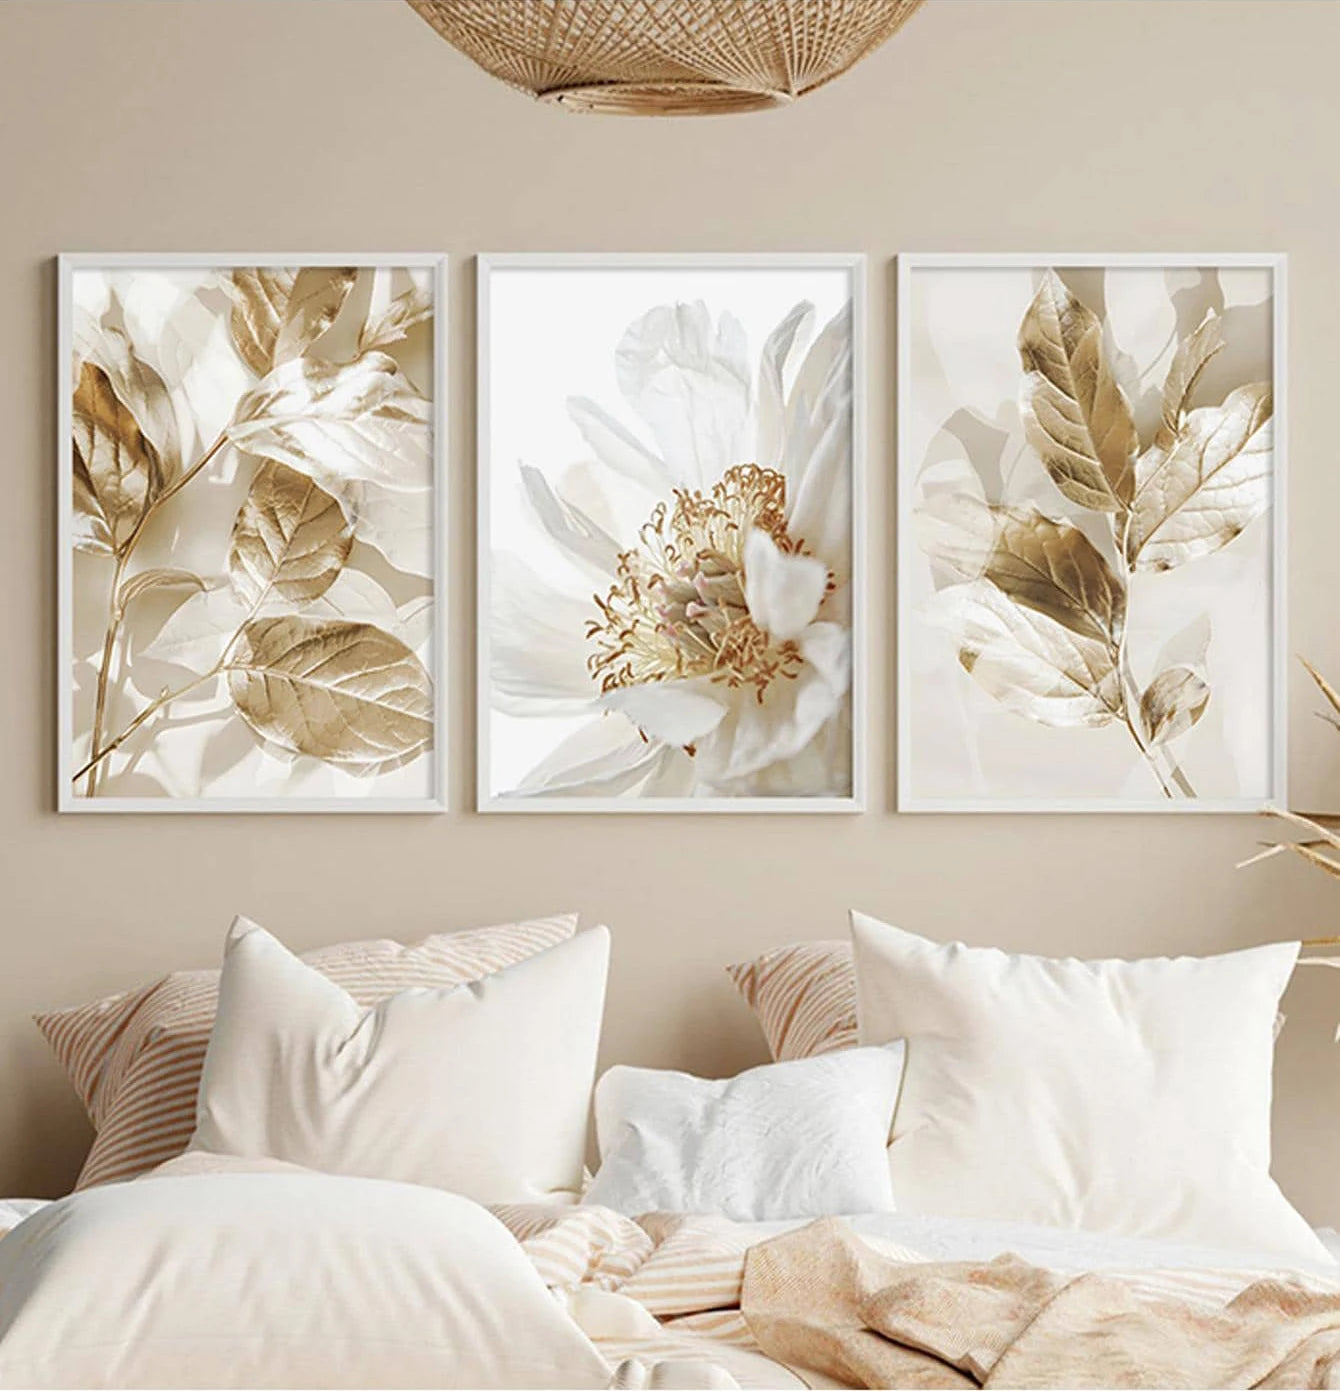 3PCS Frameless Nordic White Floral Golden Leaves Poster Wall Art Canvas Painting Prints Pictures Living Room Interior Home Decor